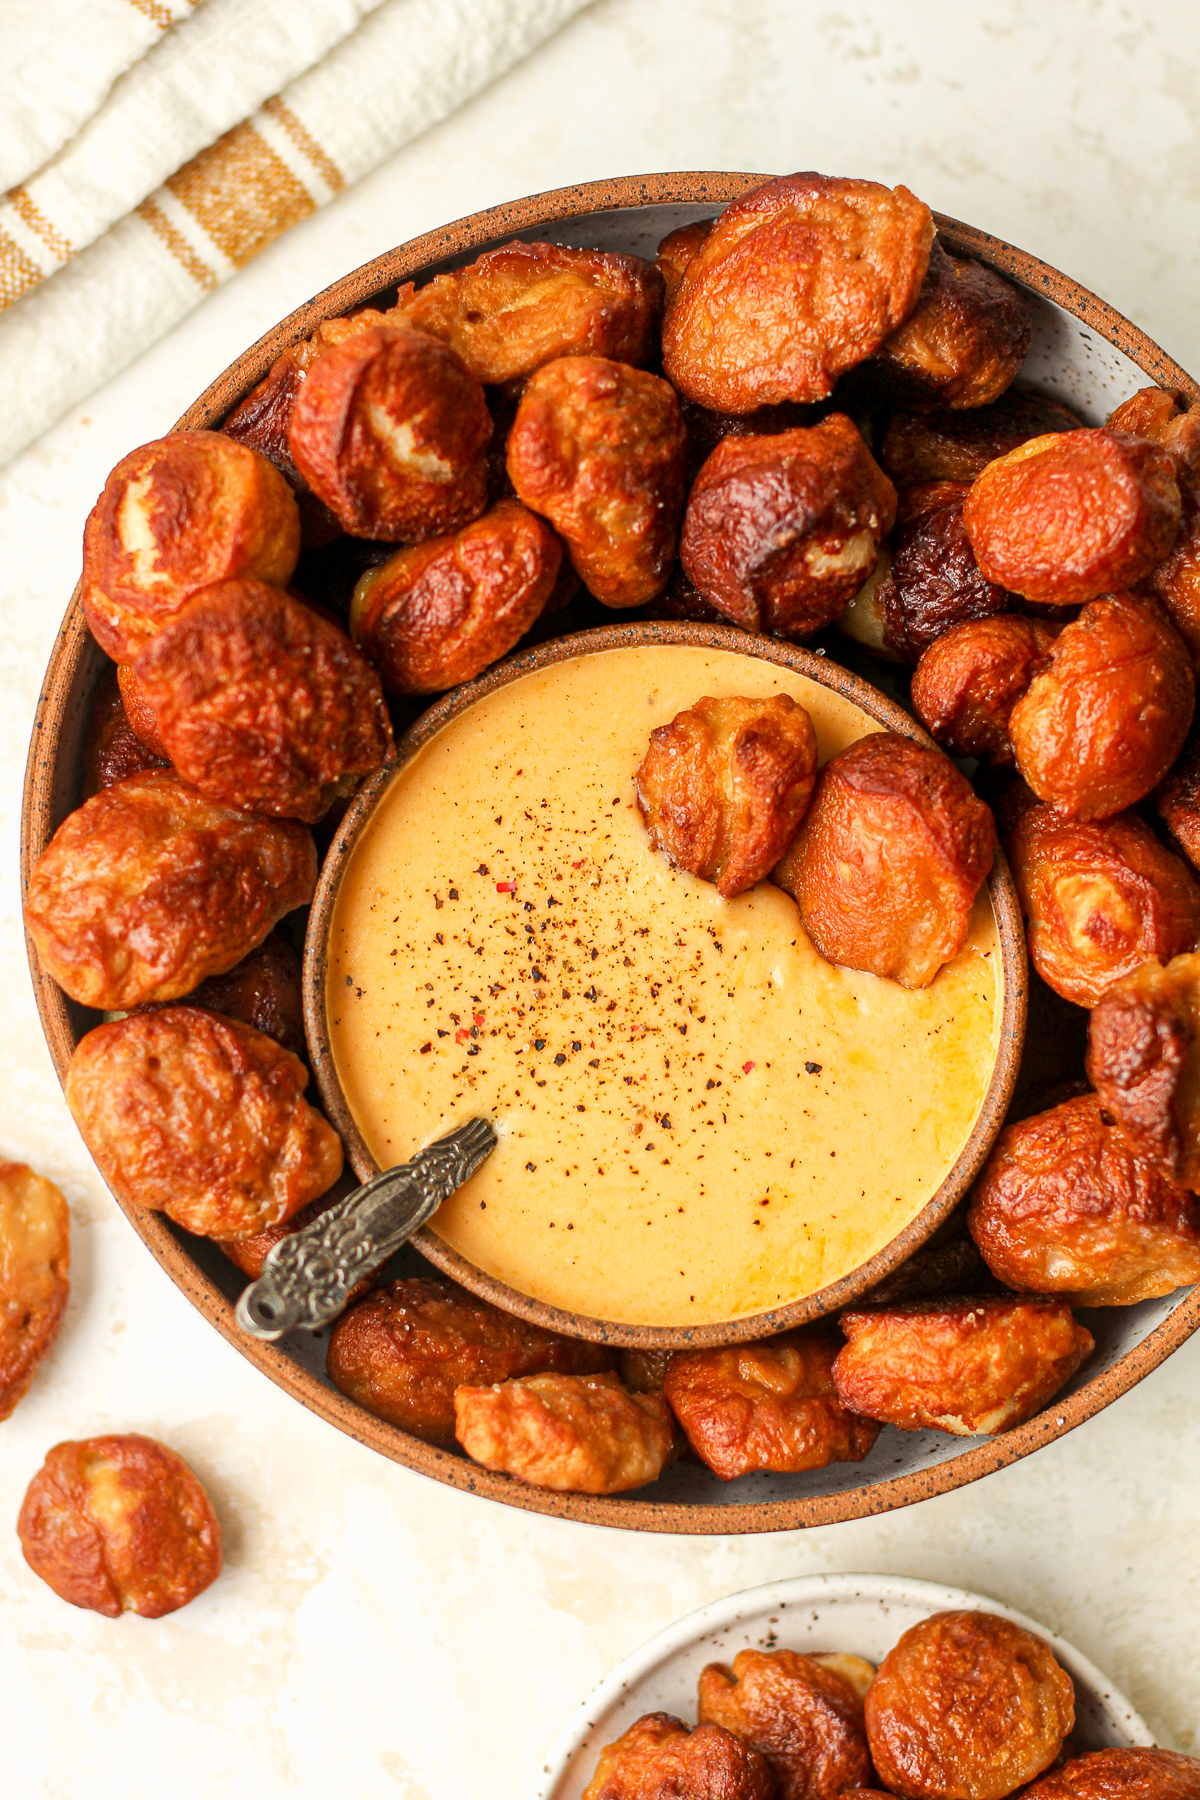 A bowl of the homemade pretzel bites with some cheese dip.